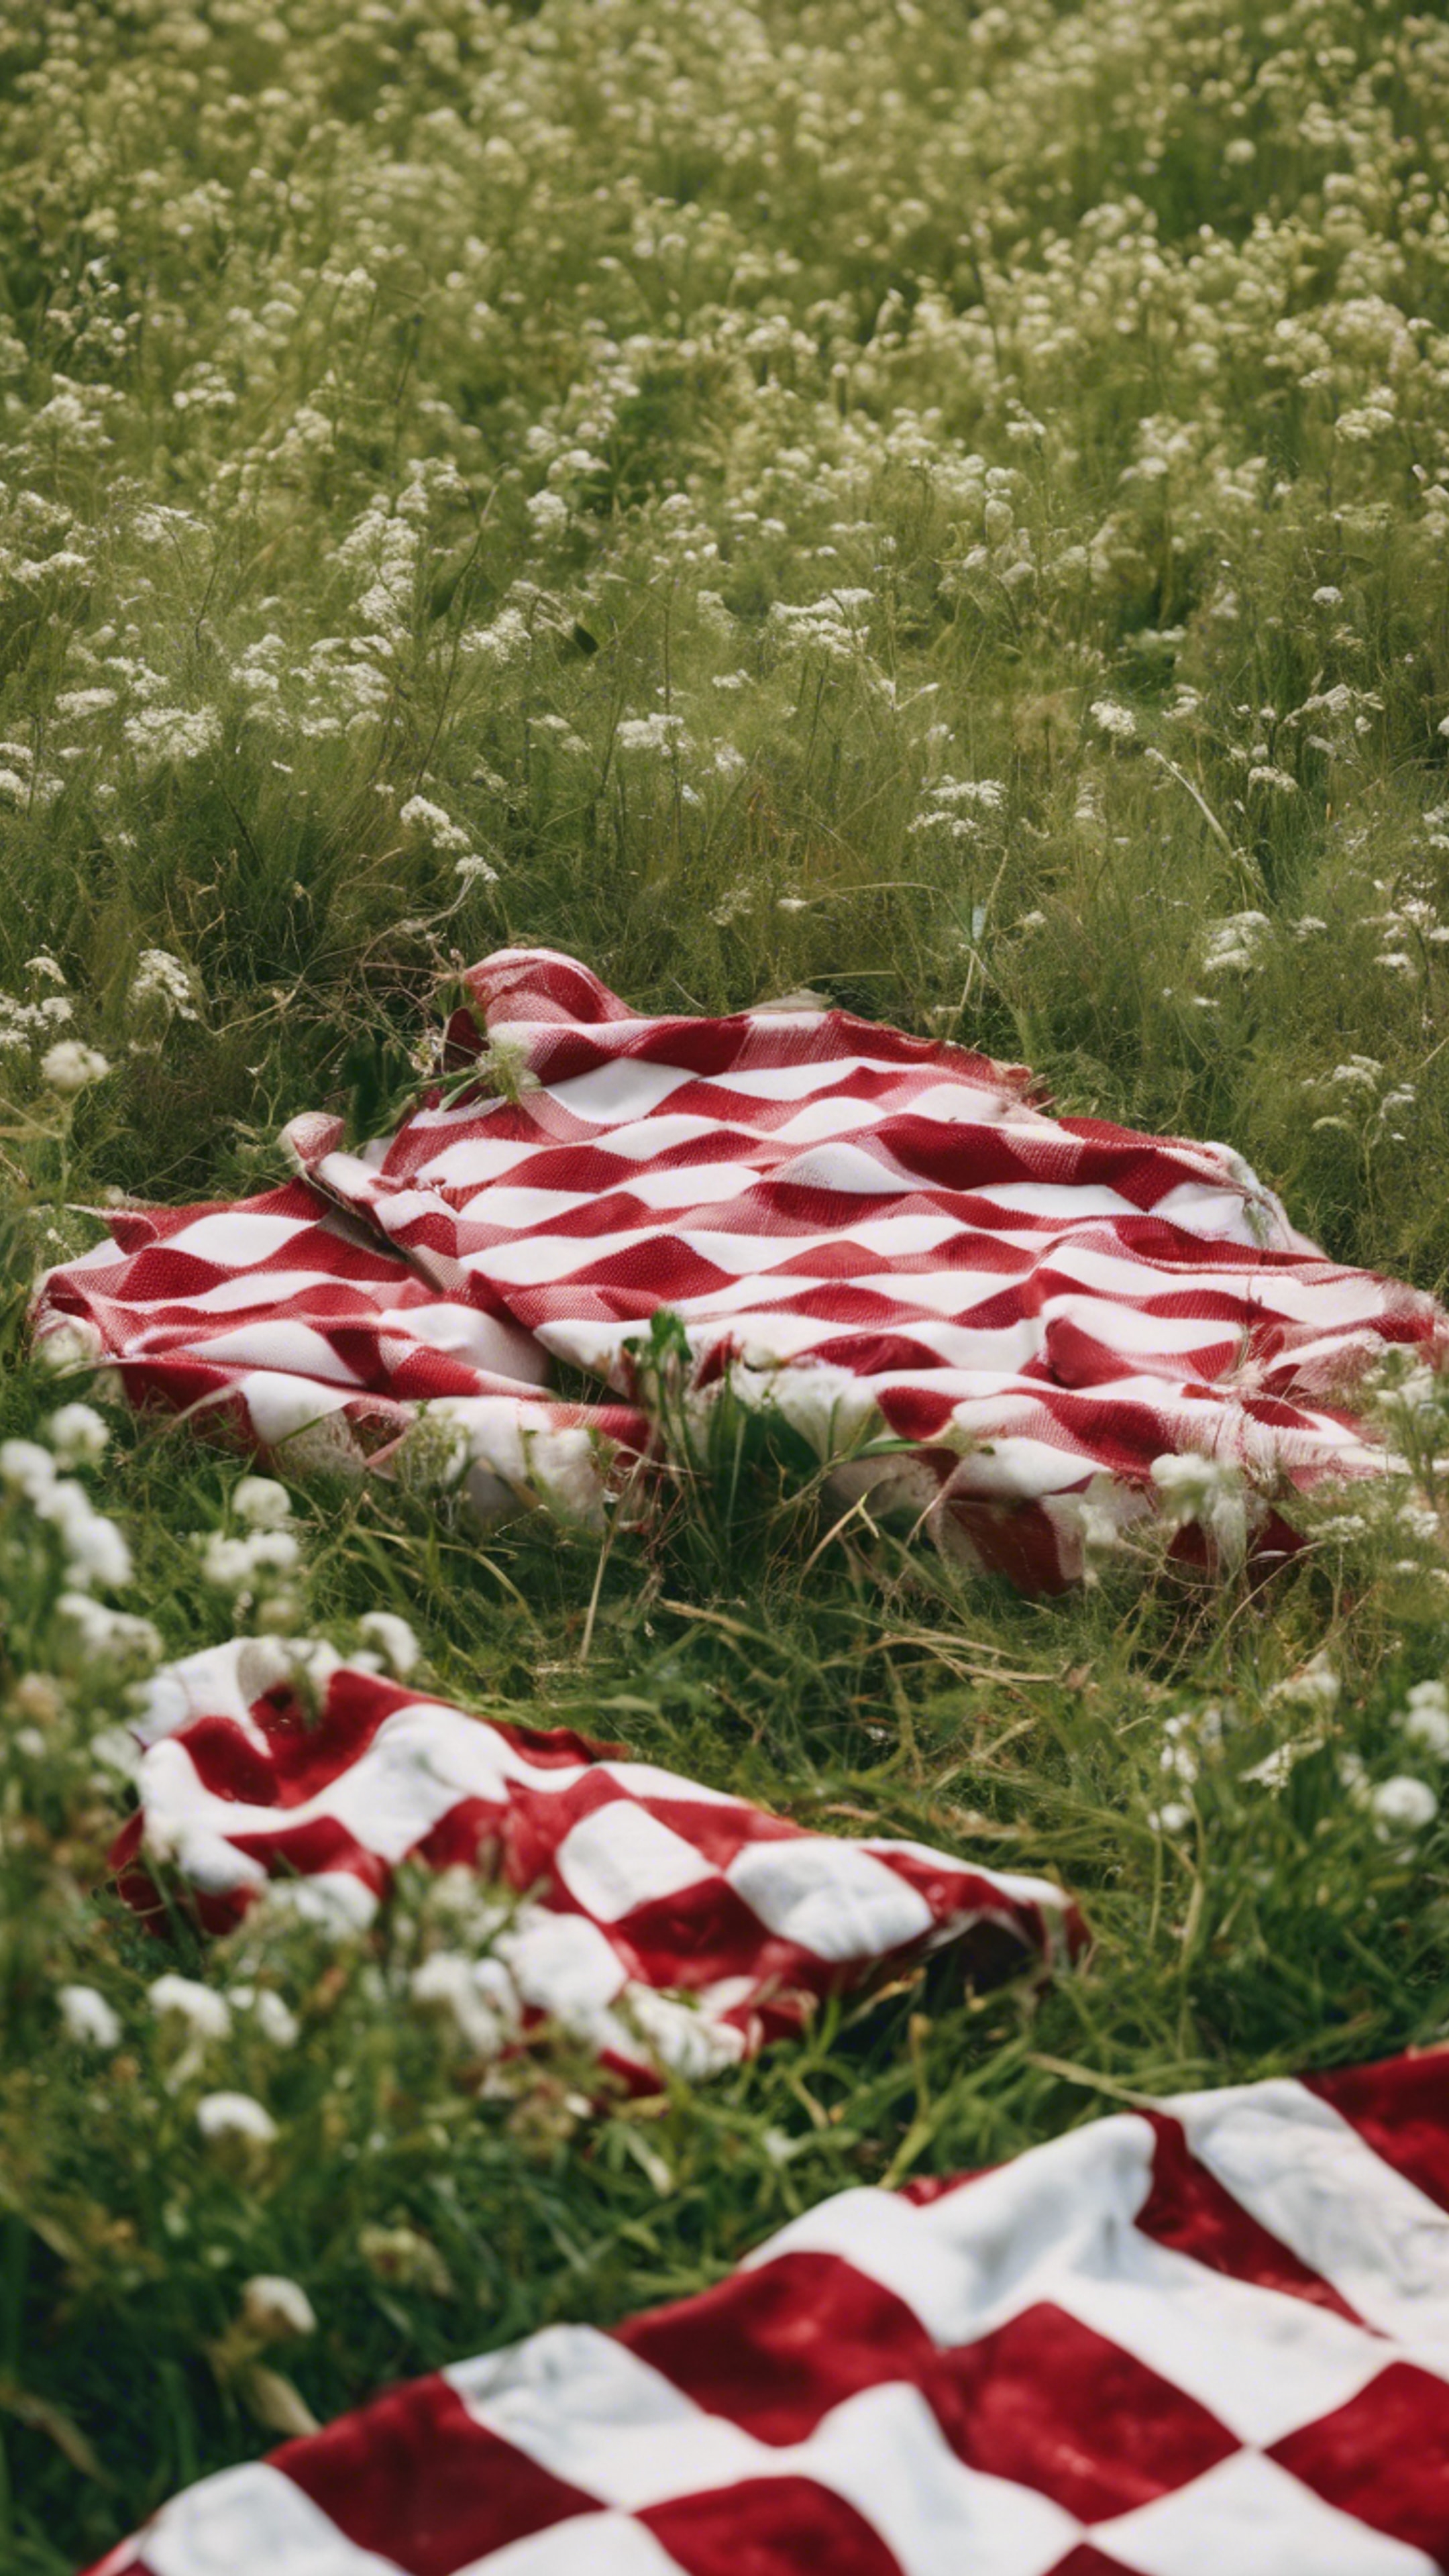 A red and white checkered picnic blanket spread out in a lush green field. Tapéta[d3f97e971ed8445aa31d]